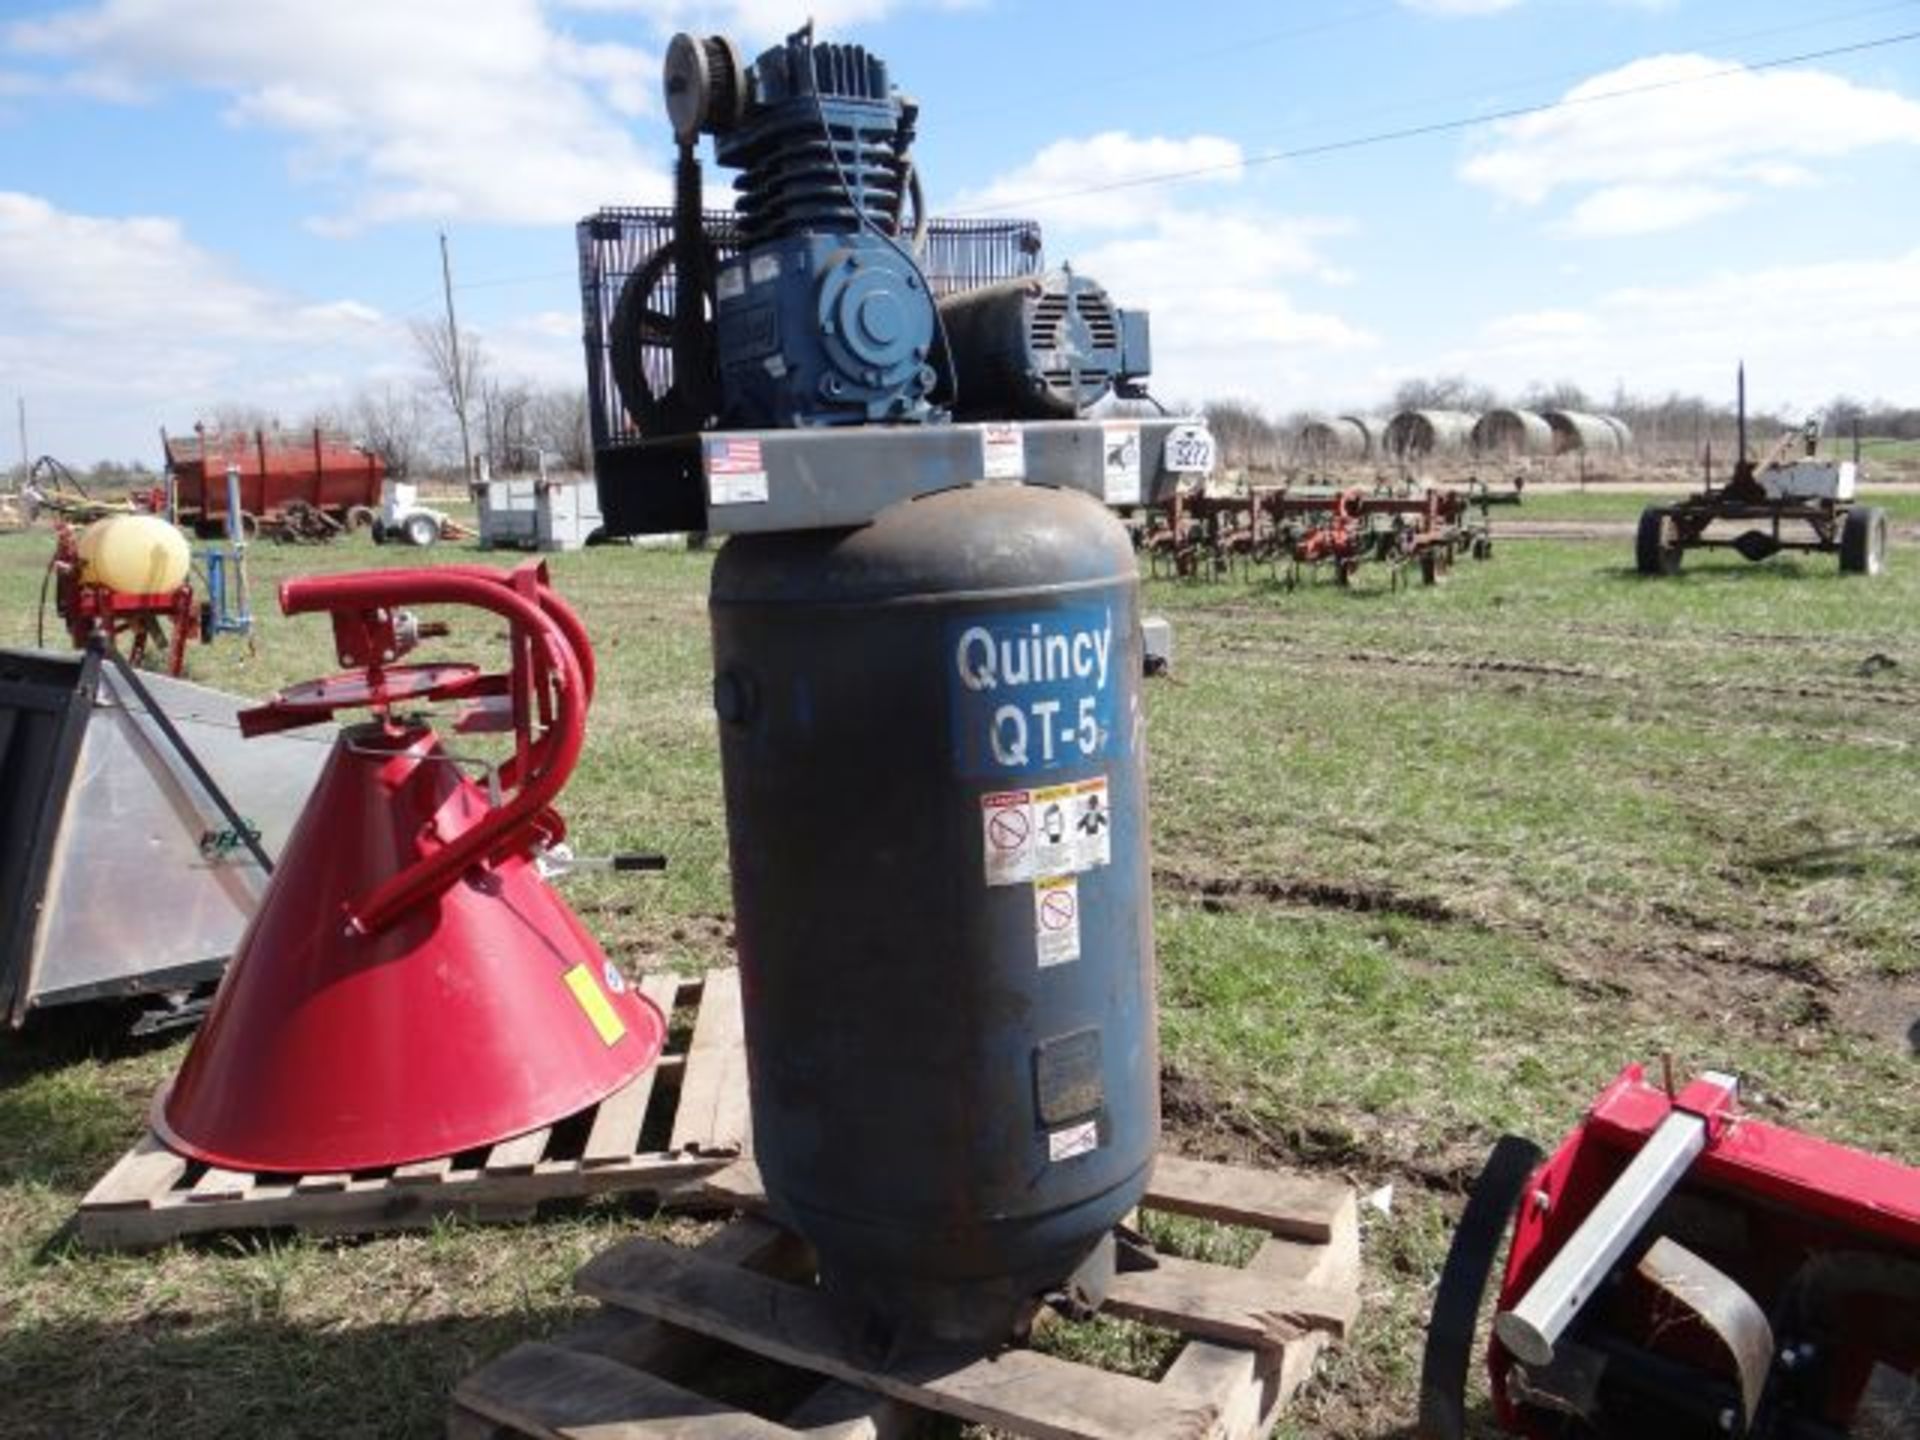 Lot 3272 Quincy 80 Gallon Air Compressor 3 Phase